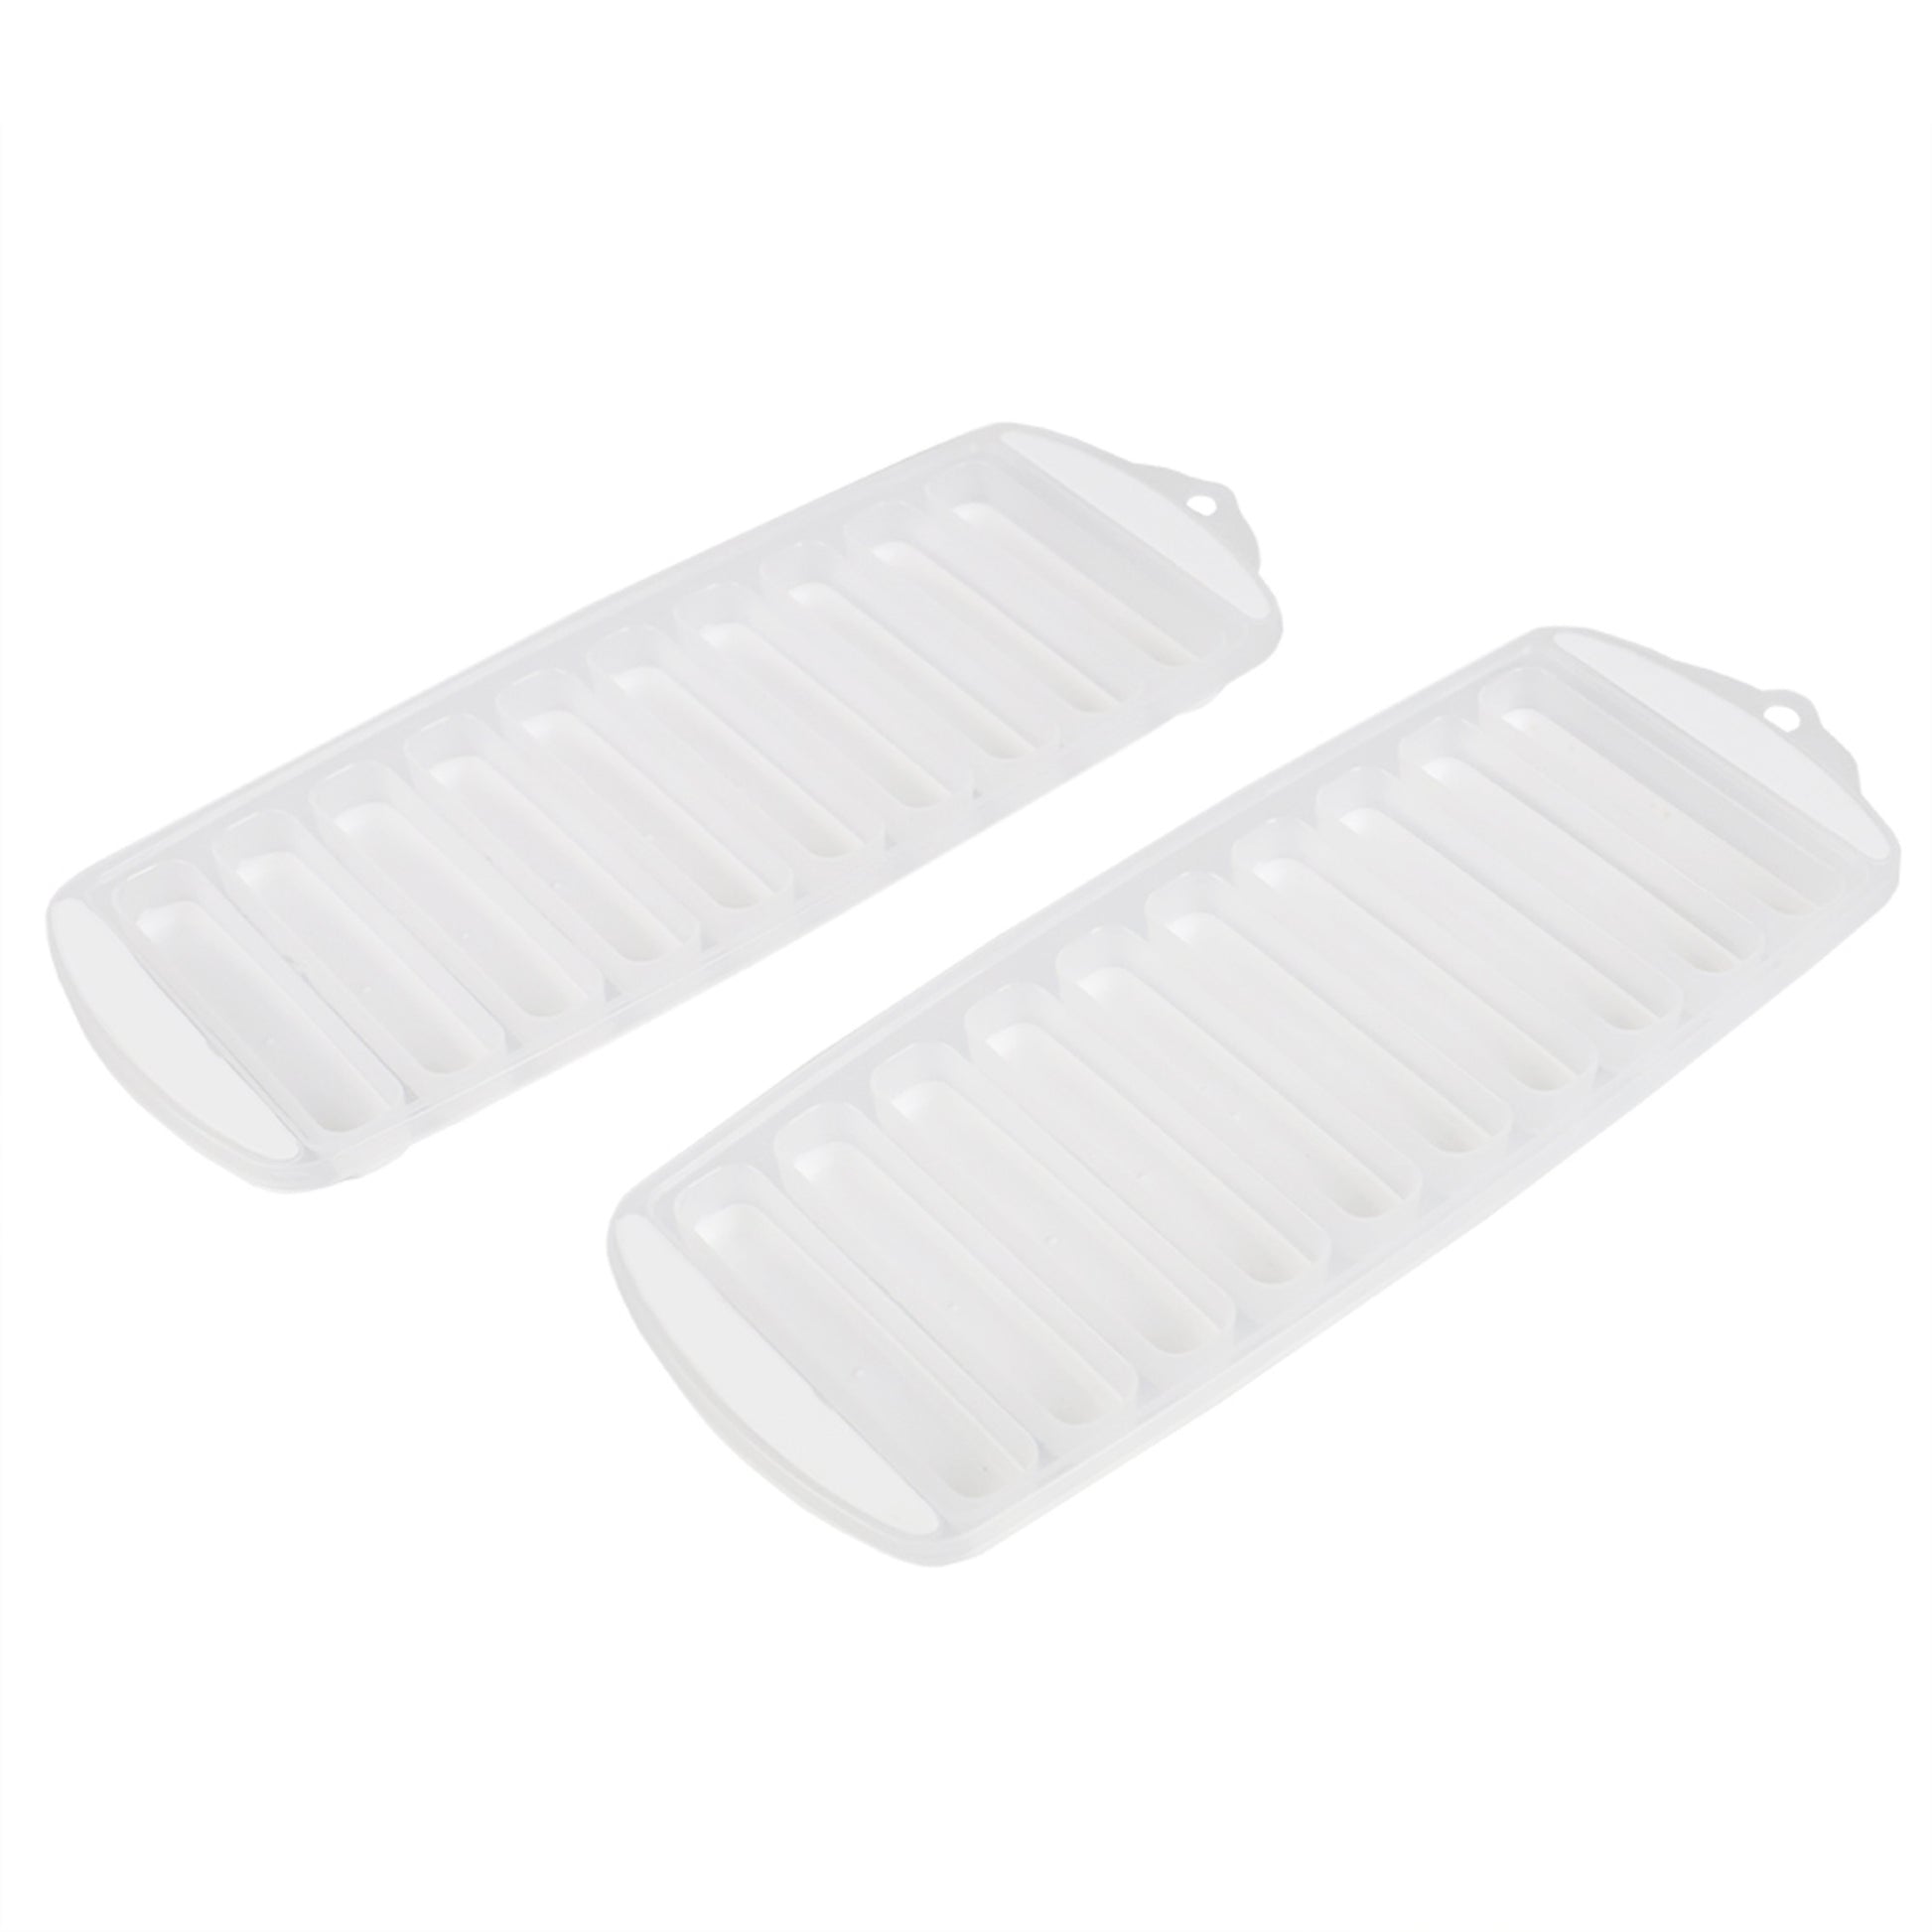 Ultra-Slim Plastic Pop-Out Ice Cube Tray, (Pack of 2)